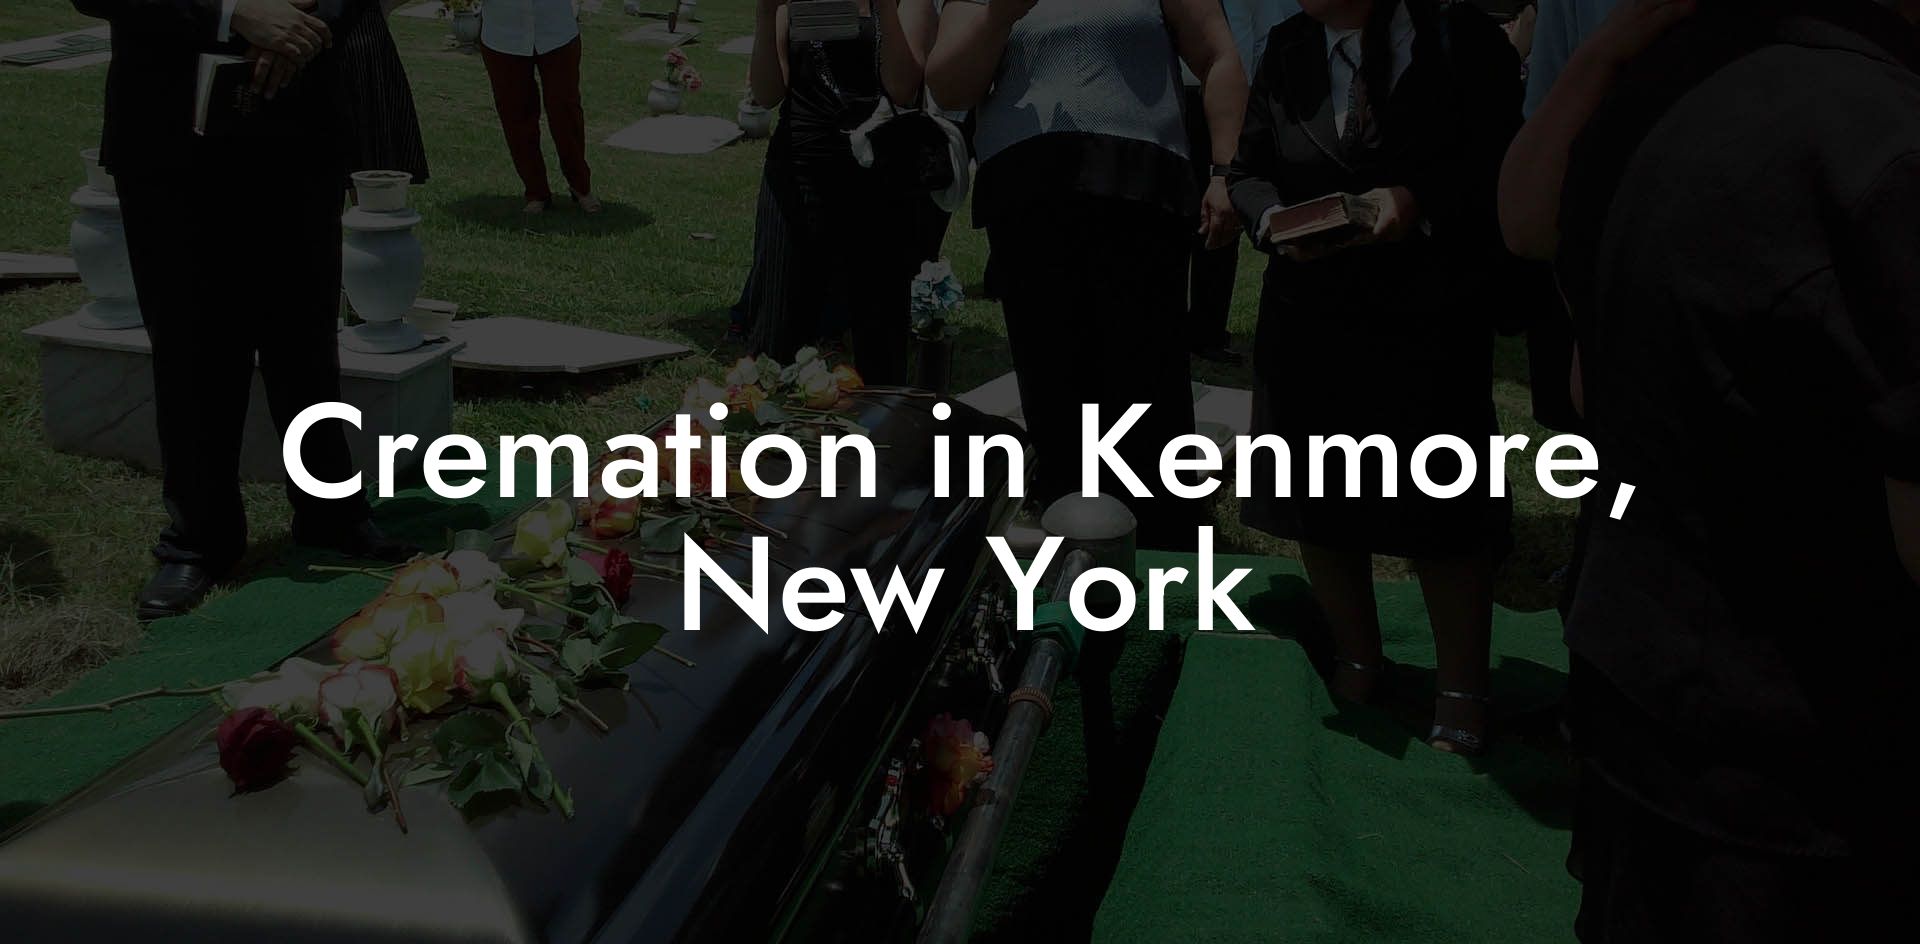 Cremation in Kenmore, New York